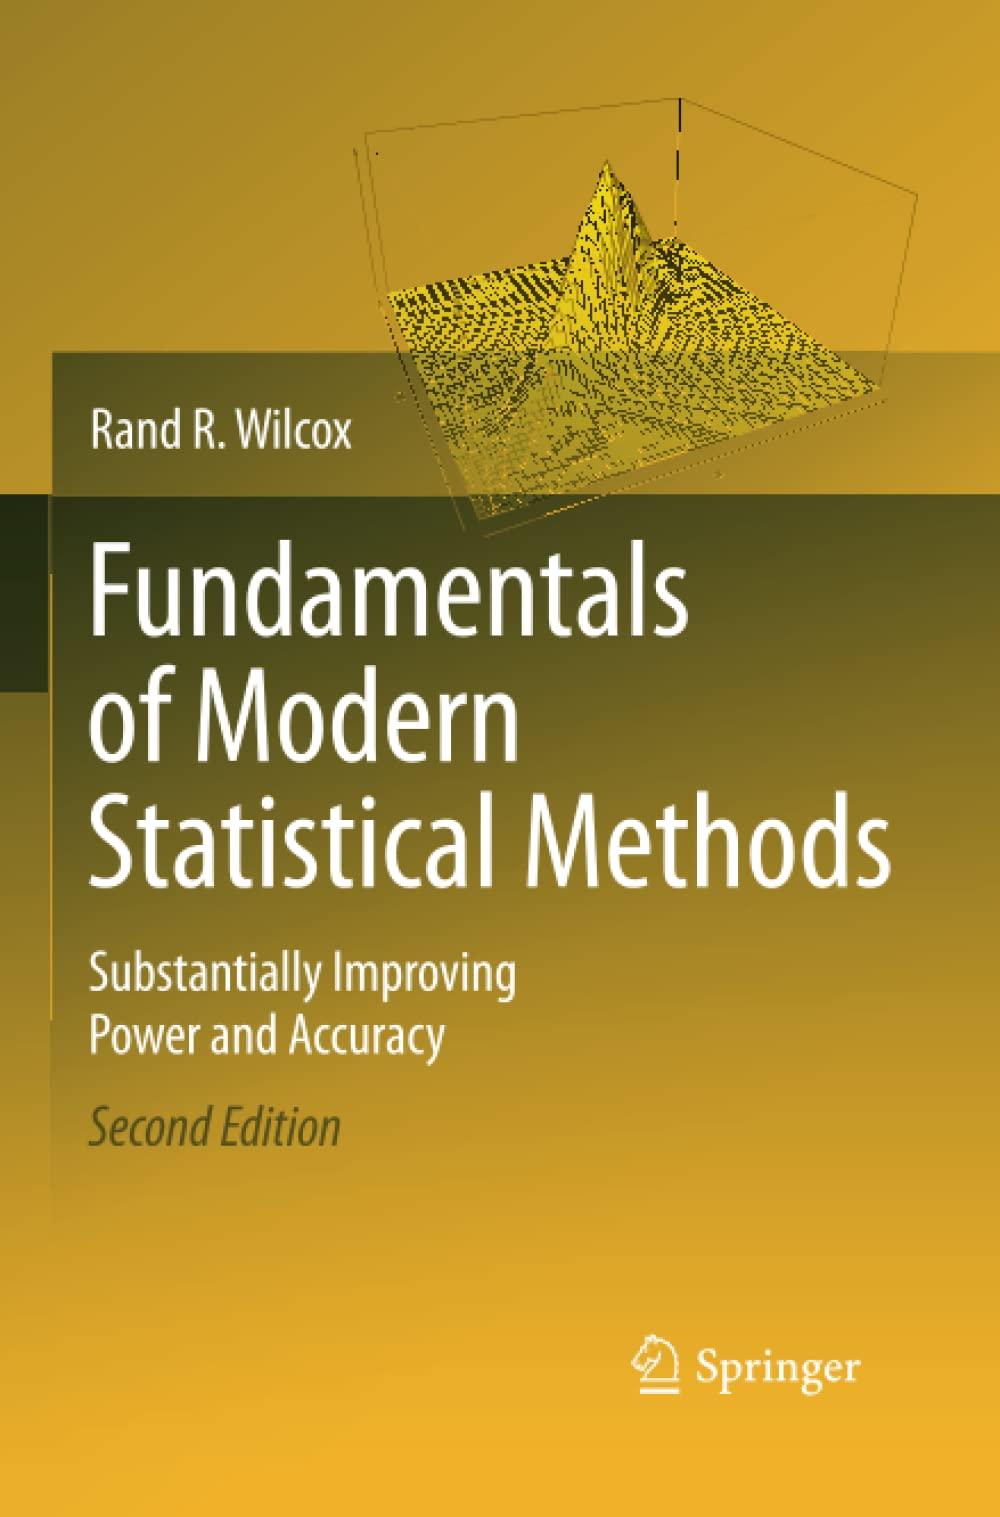 fundamentals of modern statistical methods 2nd edition rand r. wilcox 1489984704, 9781489984708